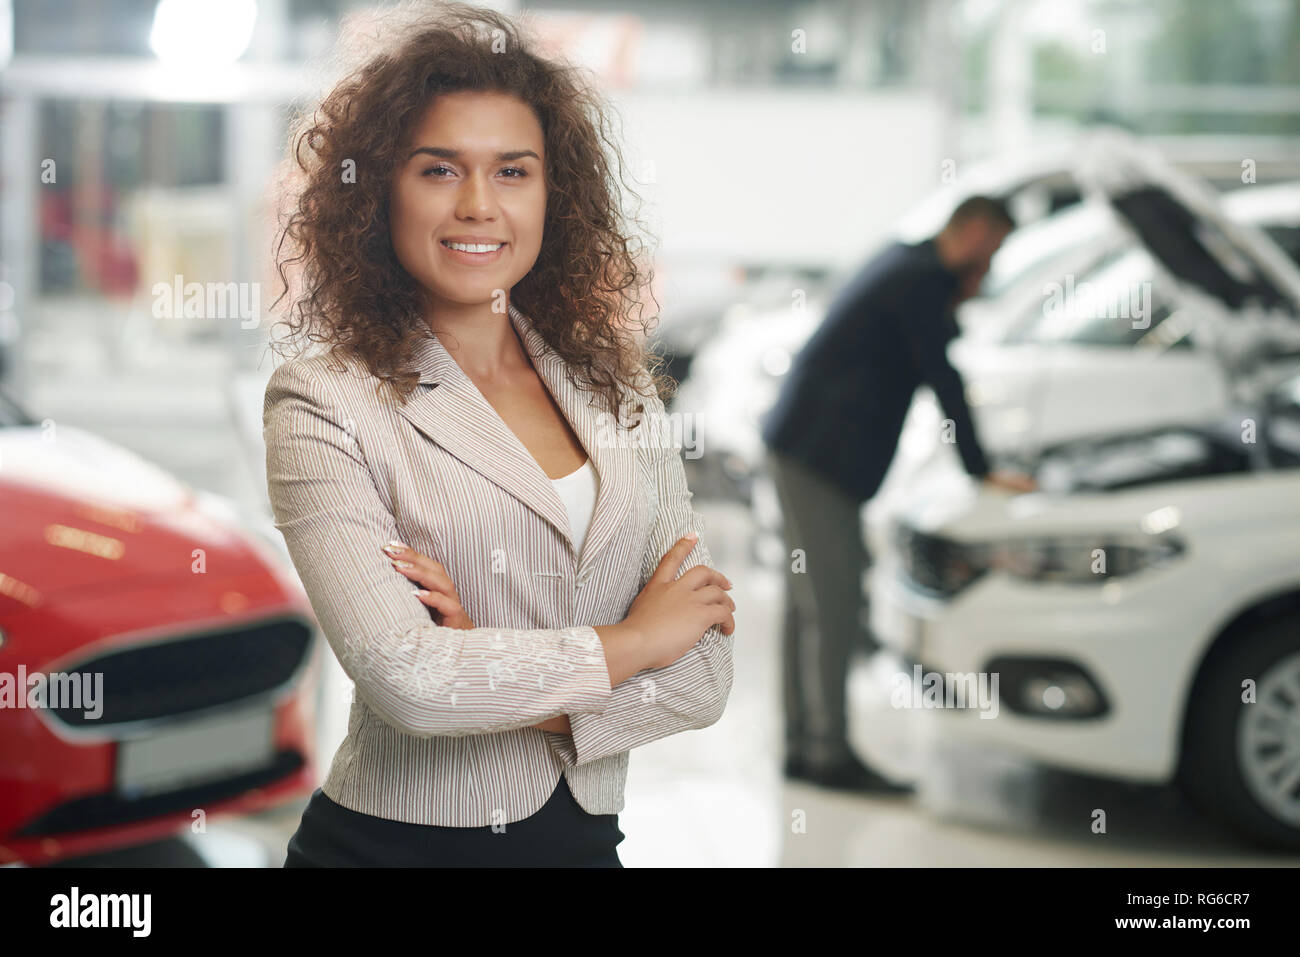 Beautiful woman standing in car showroom. Beautiful female manager of car dealership posing. Car dealer looking at camera, smiling. Unrecognizable man observing vehicle behind. Stock Photo